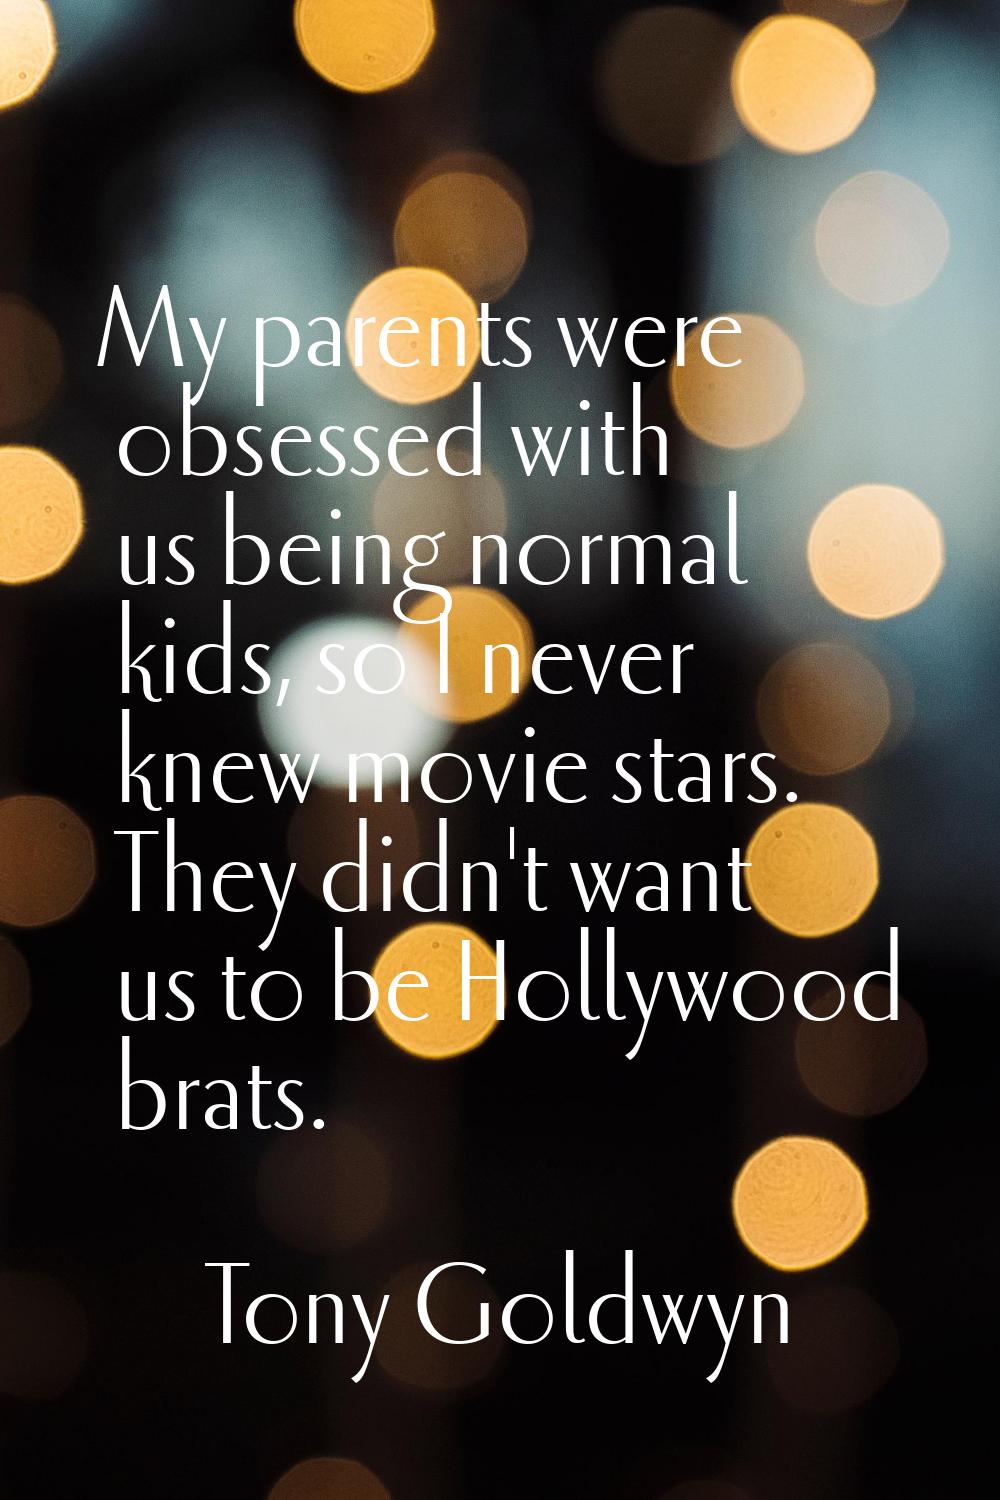 My parents were obsessed with us being normal kids, so I never knew movie stars. They didn't want u